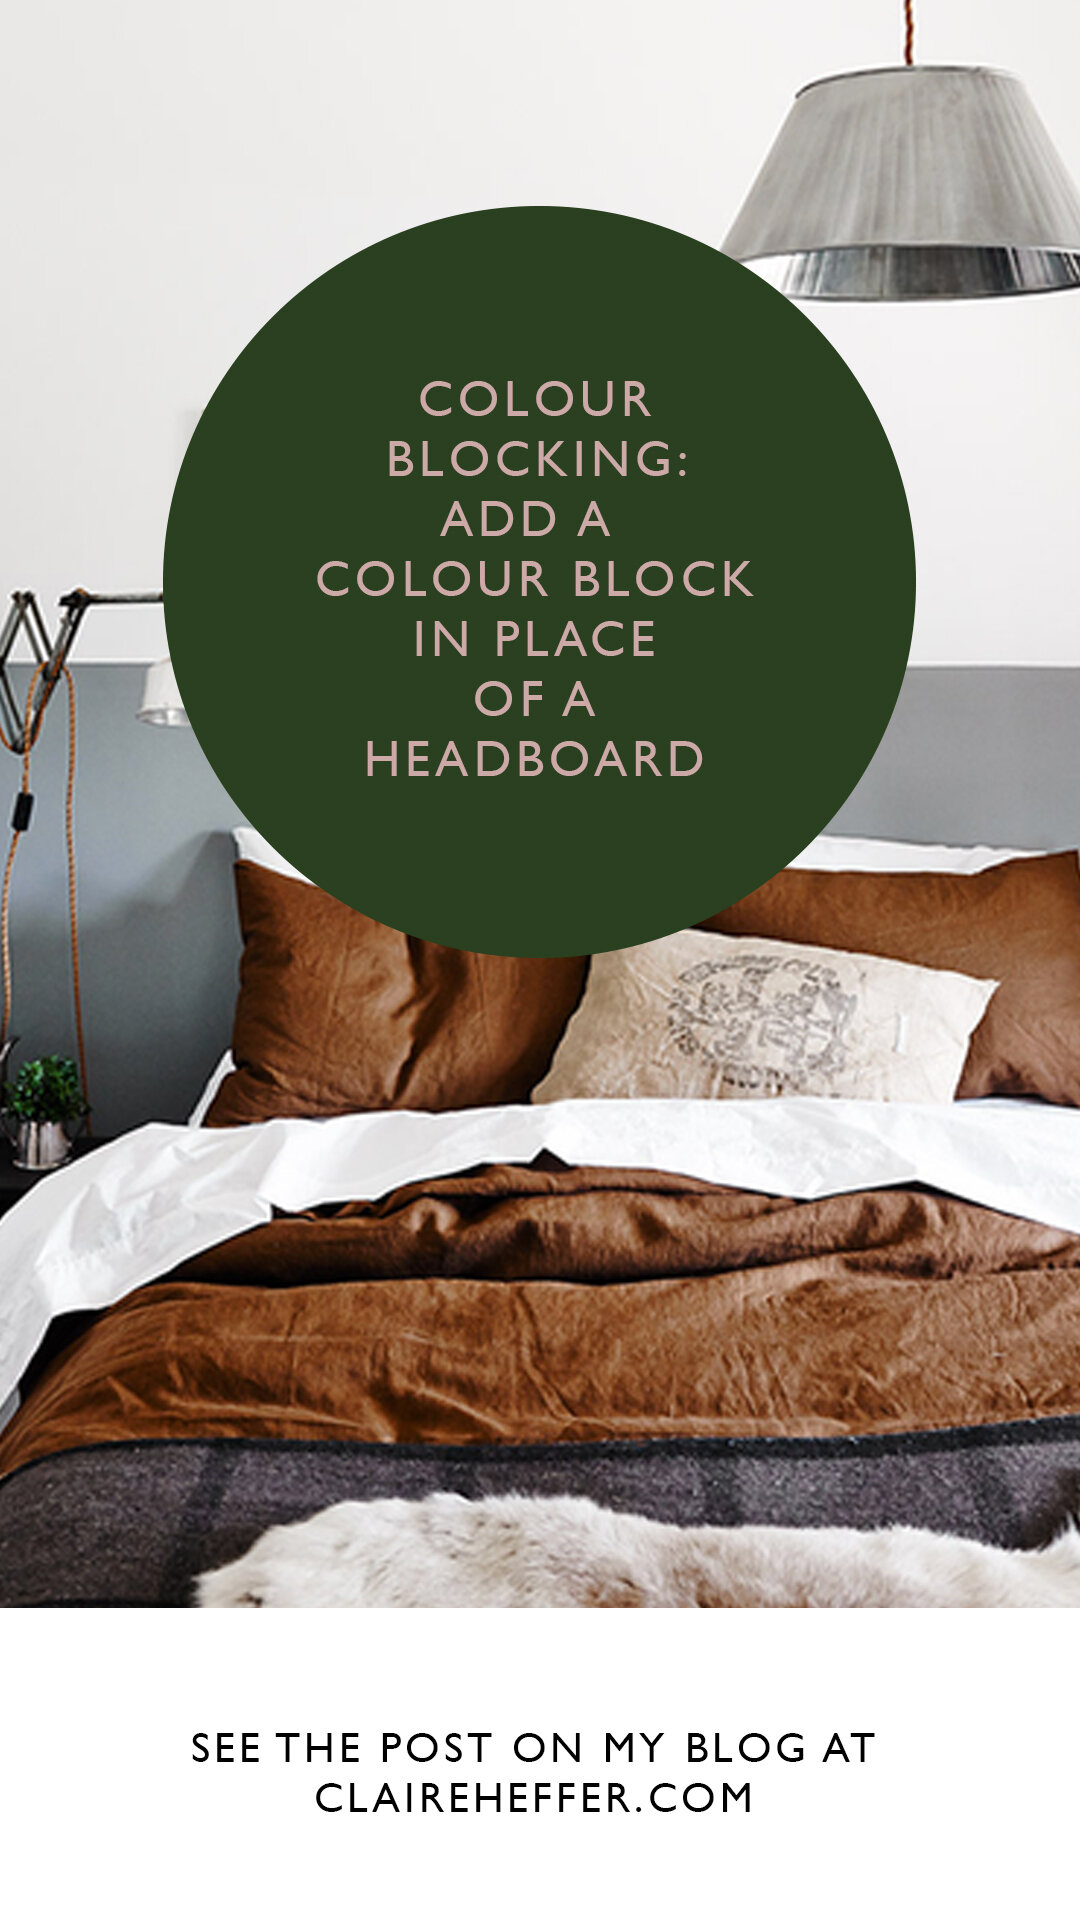 COLOUR BLOCKING- ADD A COLOUR BLOCK IN PLACE OF A HEADBOARD2.jpg